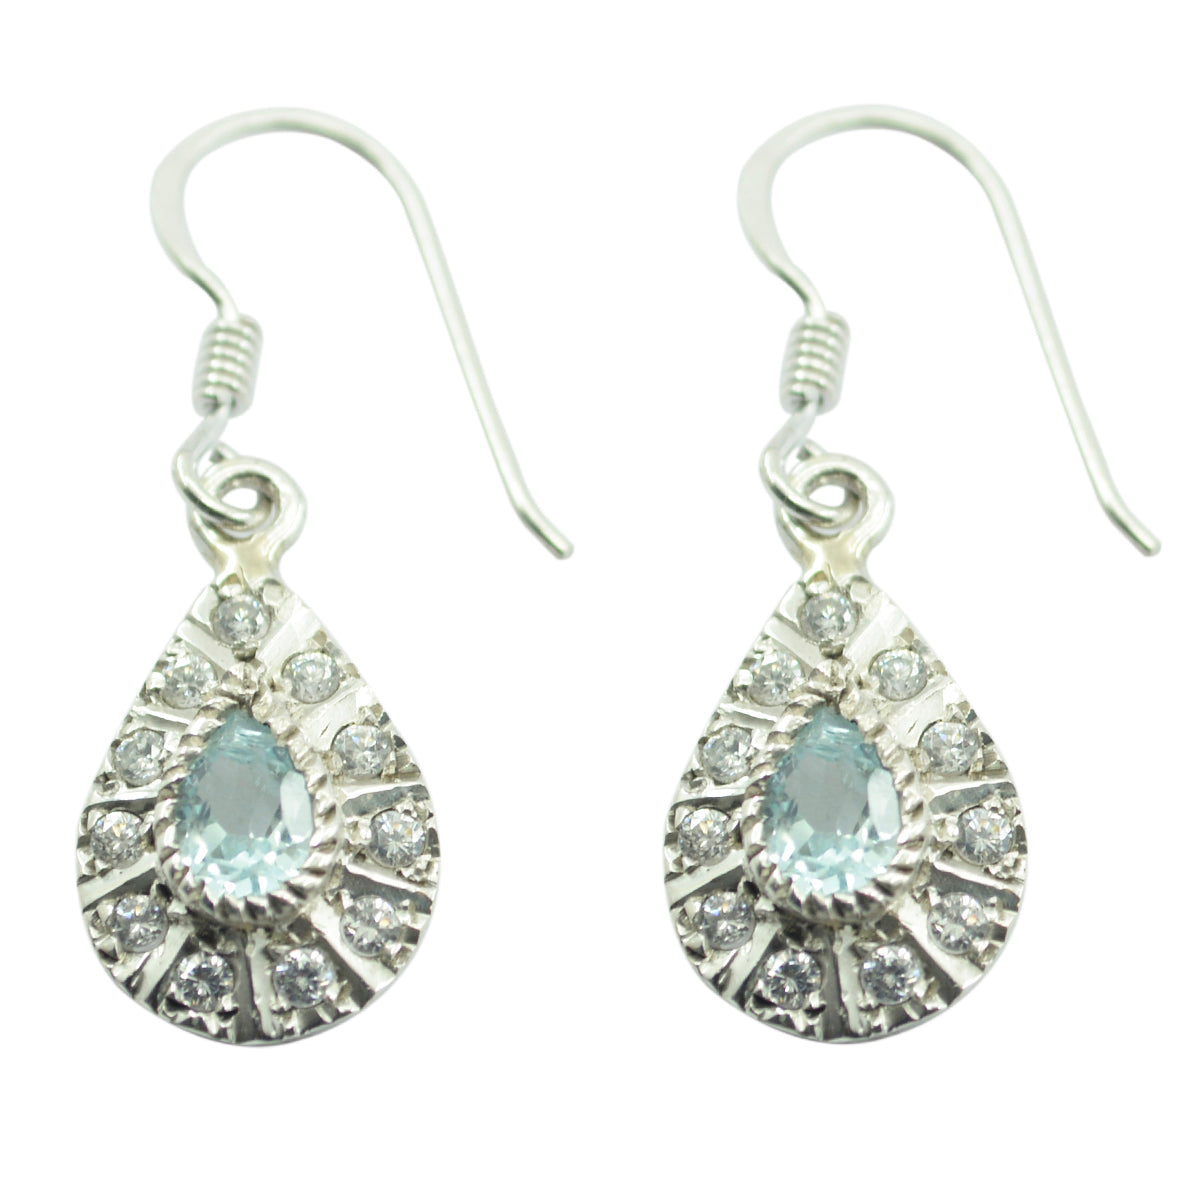 Riyo Good Gemstones pear Faceted Blue Topaz Silver Earrings gift for labour day